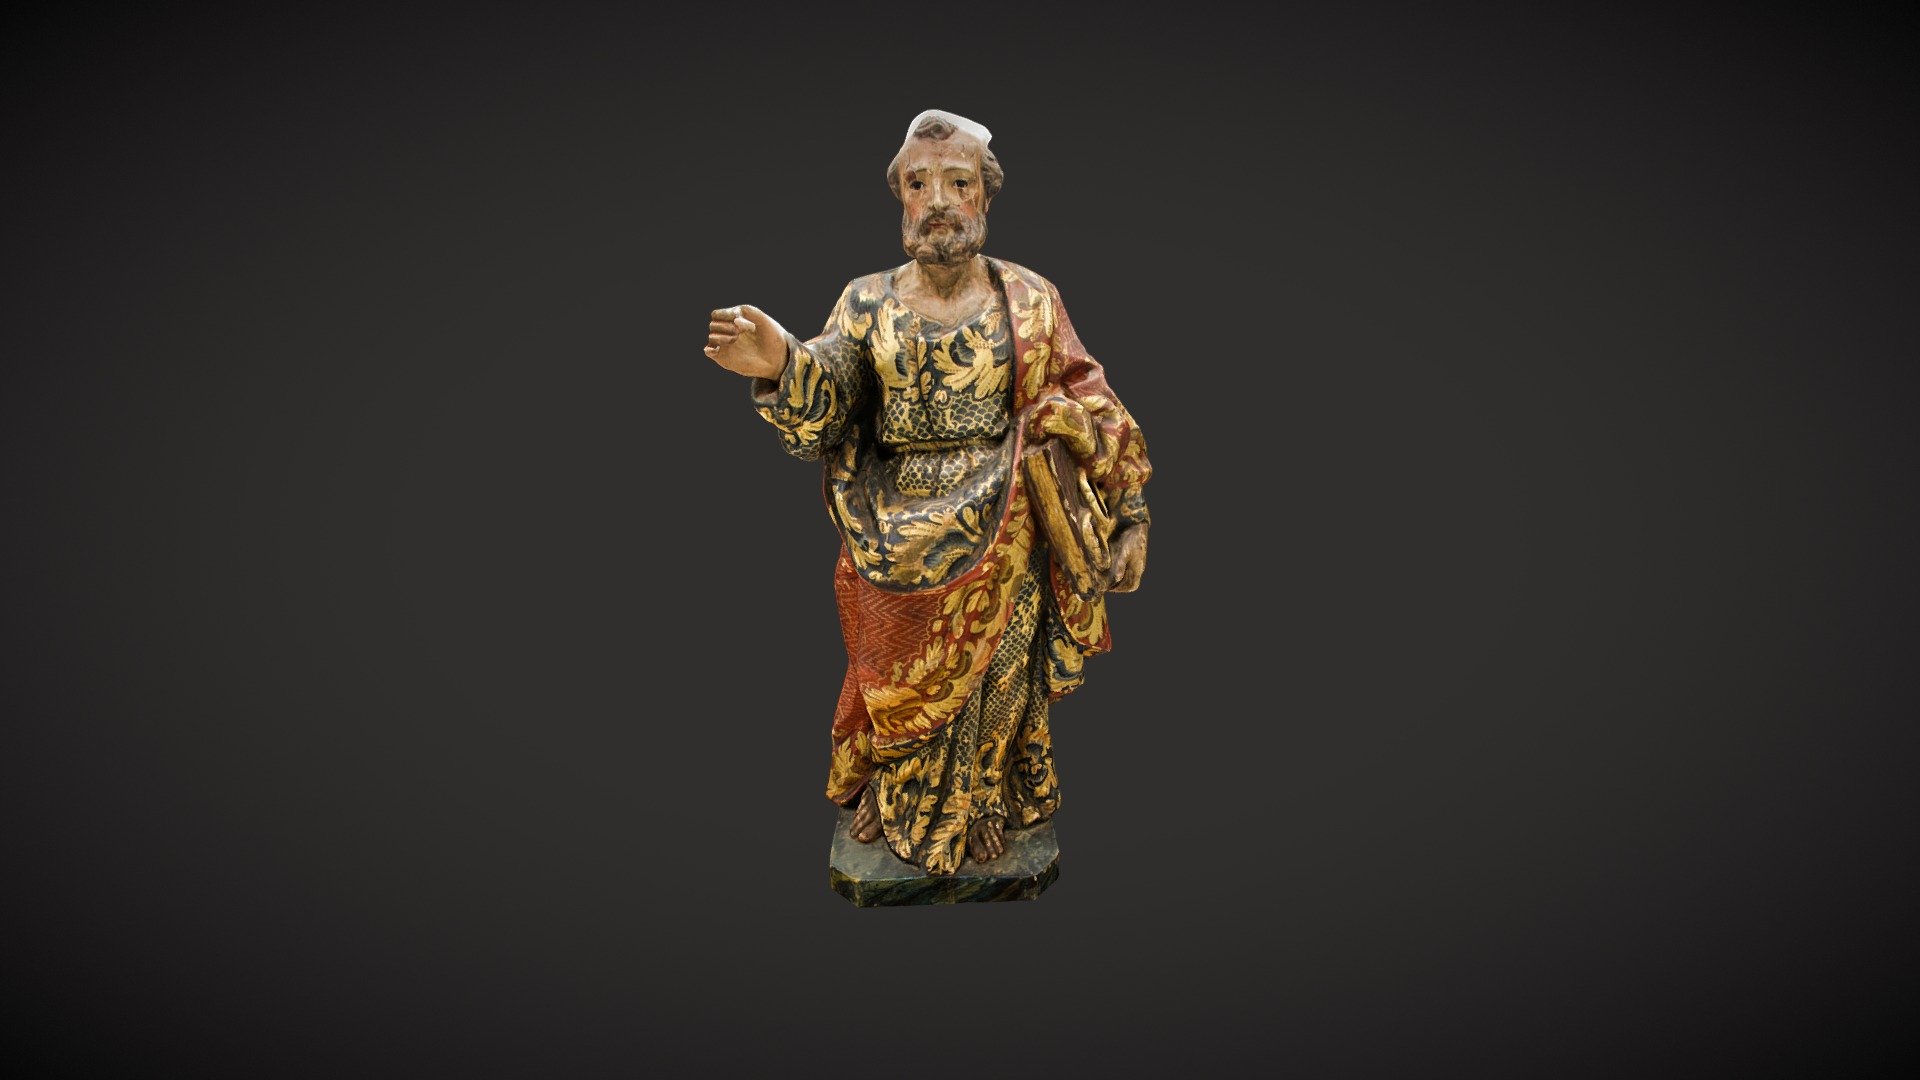 This statue of St. Peter is a small, ornate piece approximately 10 inches tall.  It was most likely used at a private devotional altar in an affluent Ecuadorian household in the 19th century.  The twelve apostles were usually depicted together, so there are most likely 11 other statues of the same size that came in a set, and have since been lost.  These apostles statues are also known as Santos figures, or Apostolados 3d model